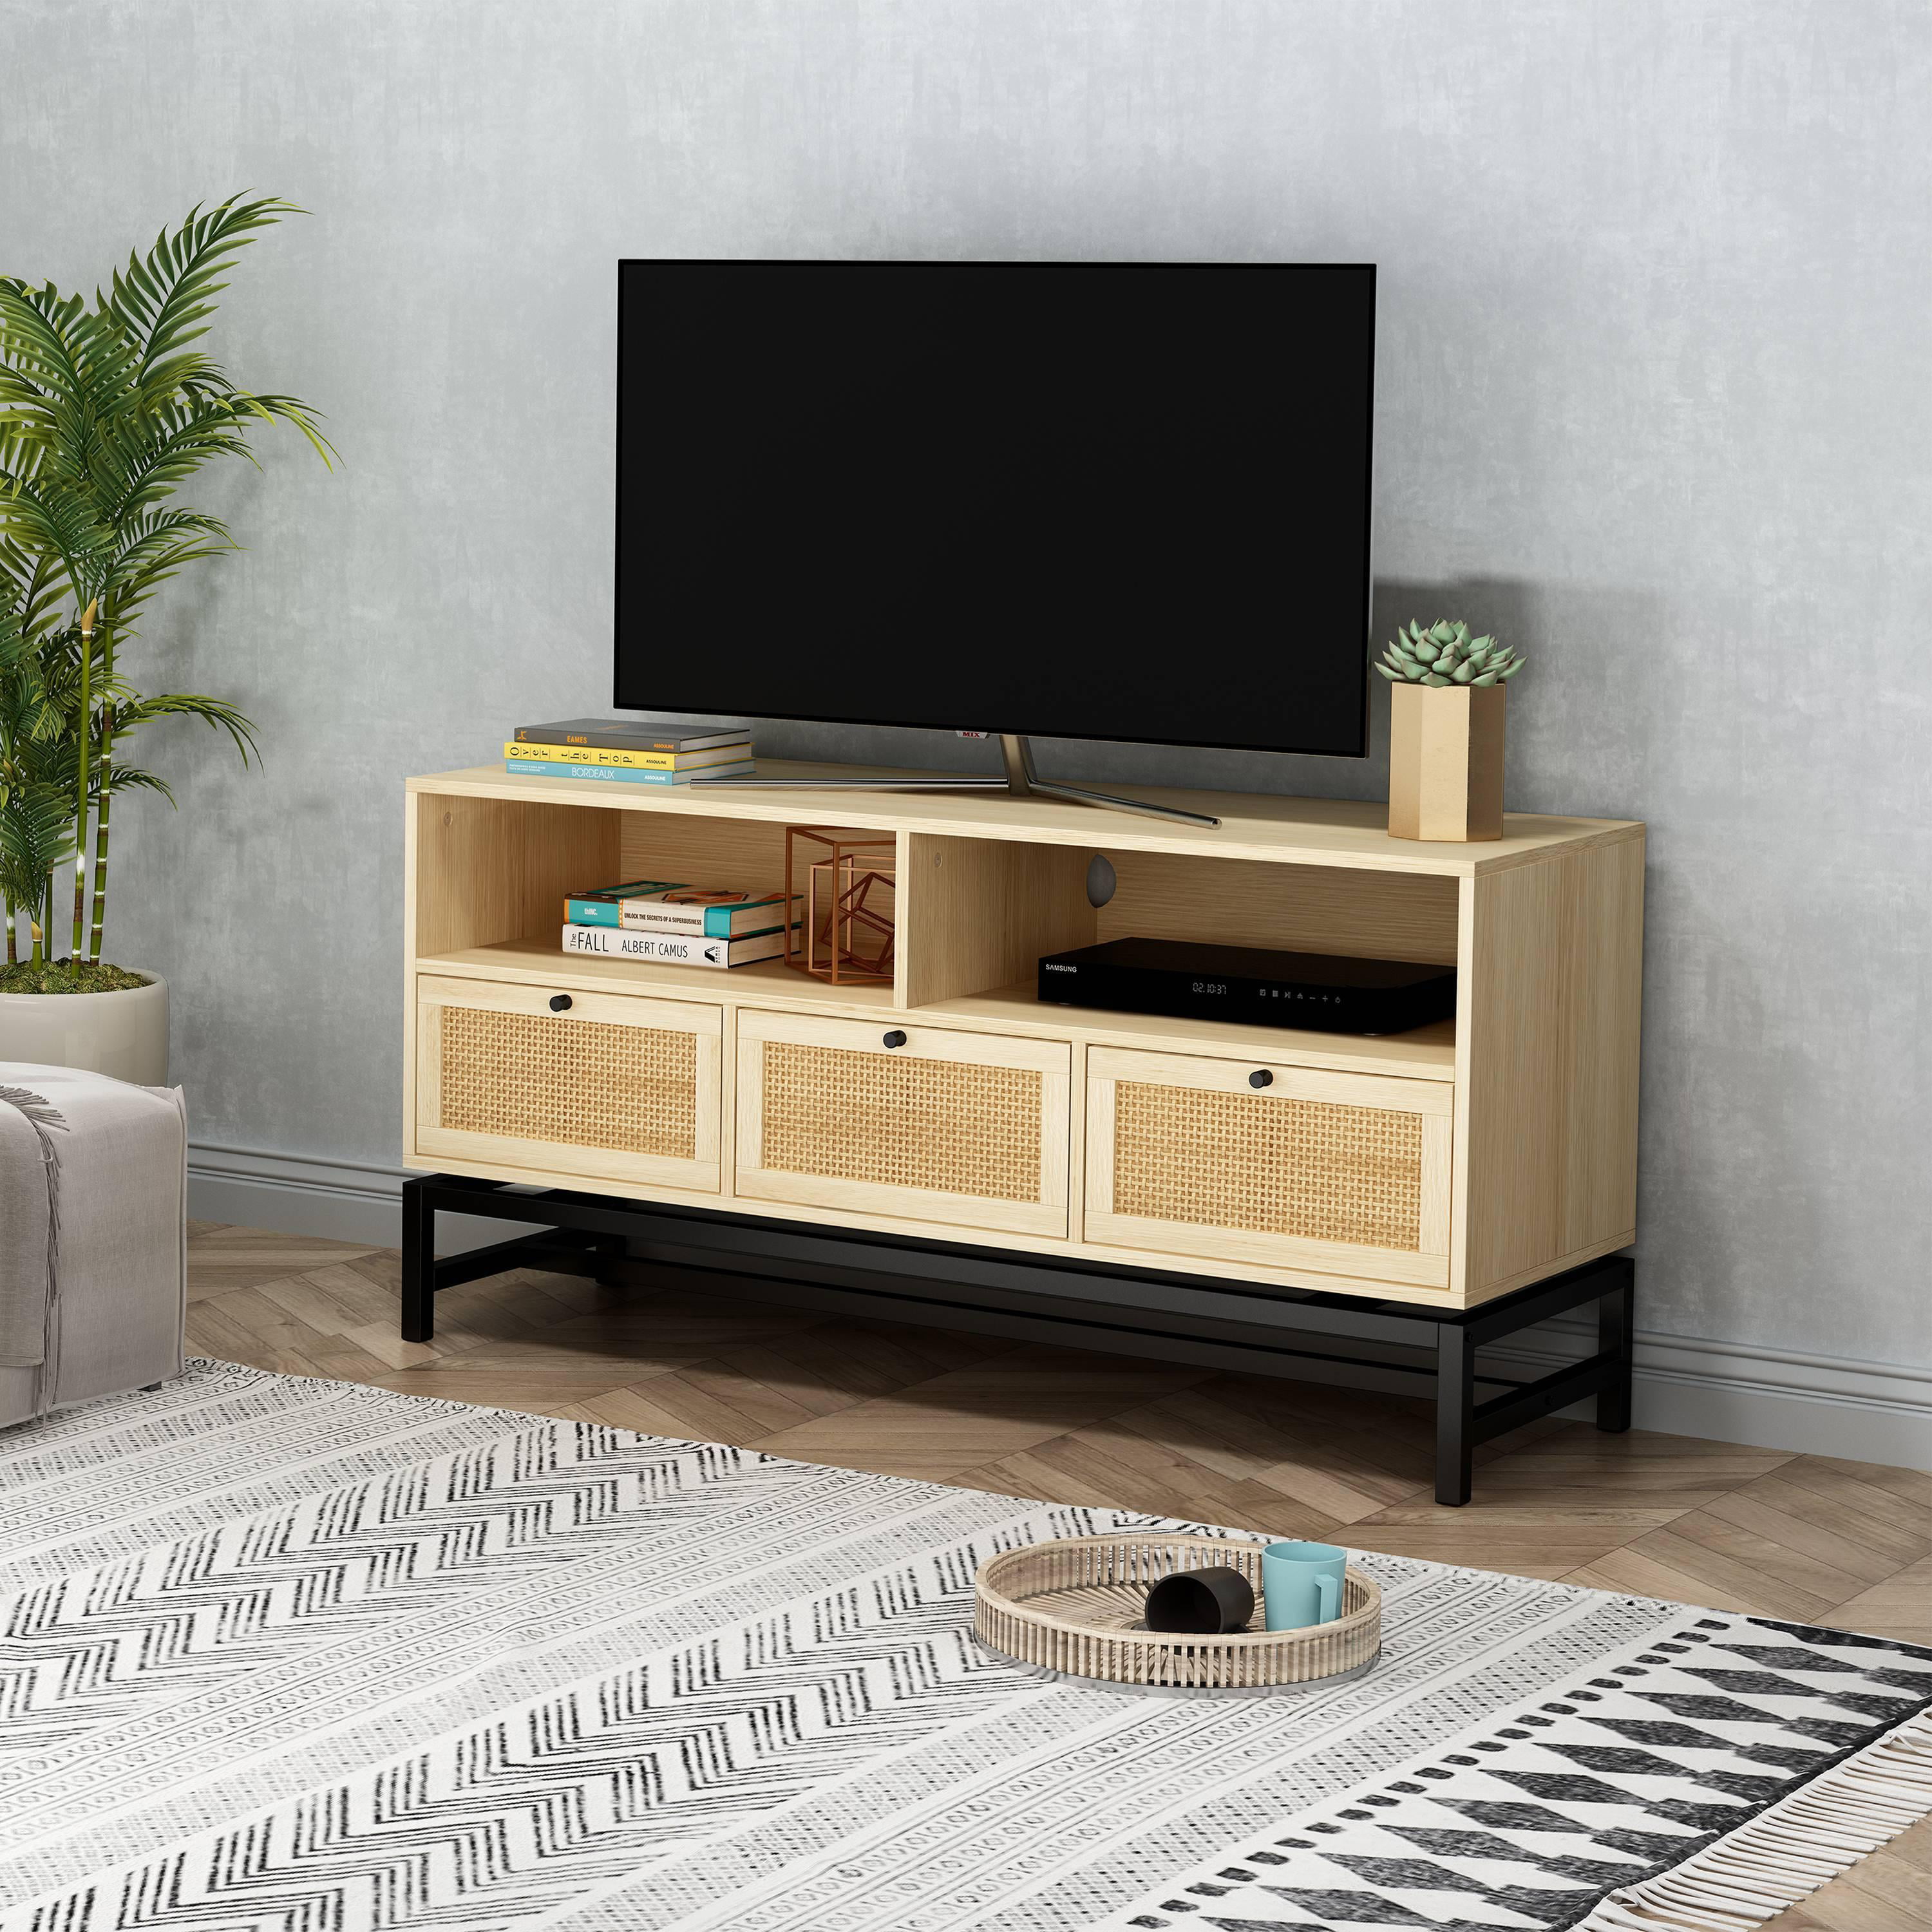 TV Stand Cabinet Multimedia Entertainment Centres Modern White Storage Cabinet TV Table with Door and Shelves 47 inches Wood Audio Buffet Equipment Console for Living Room Bedroom